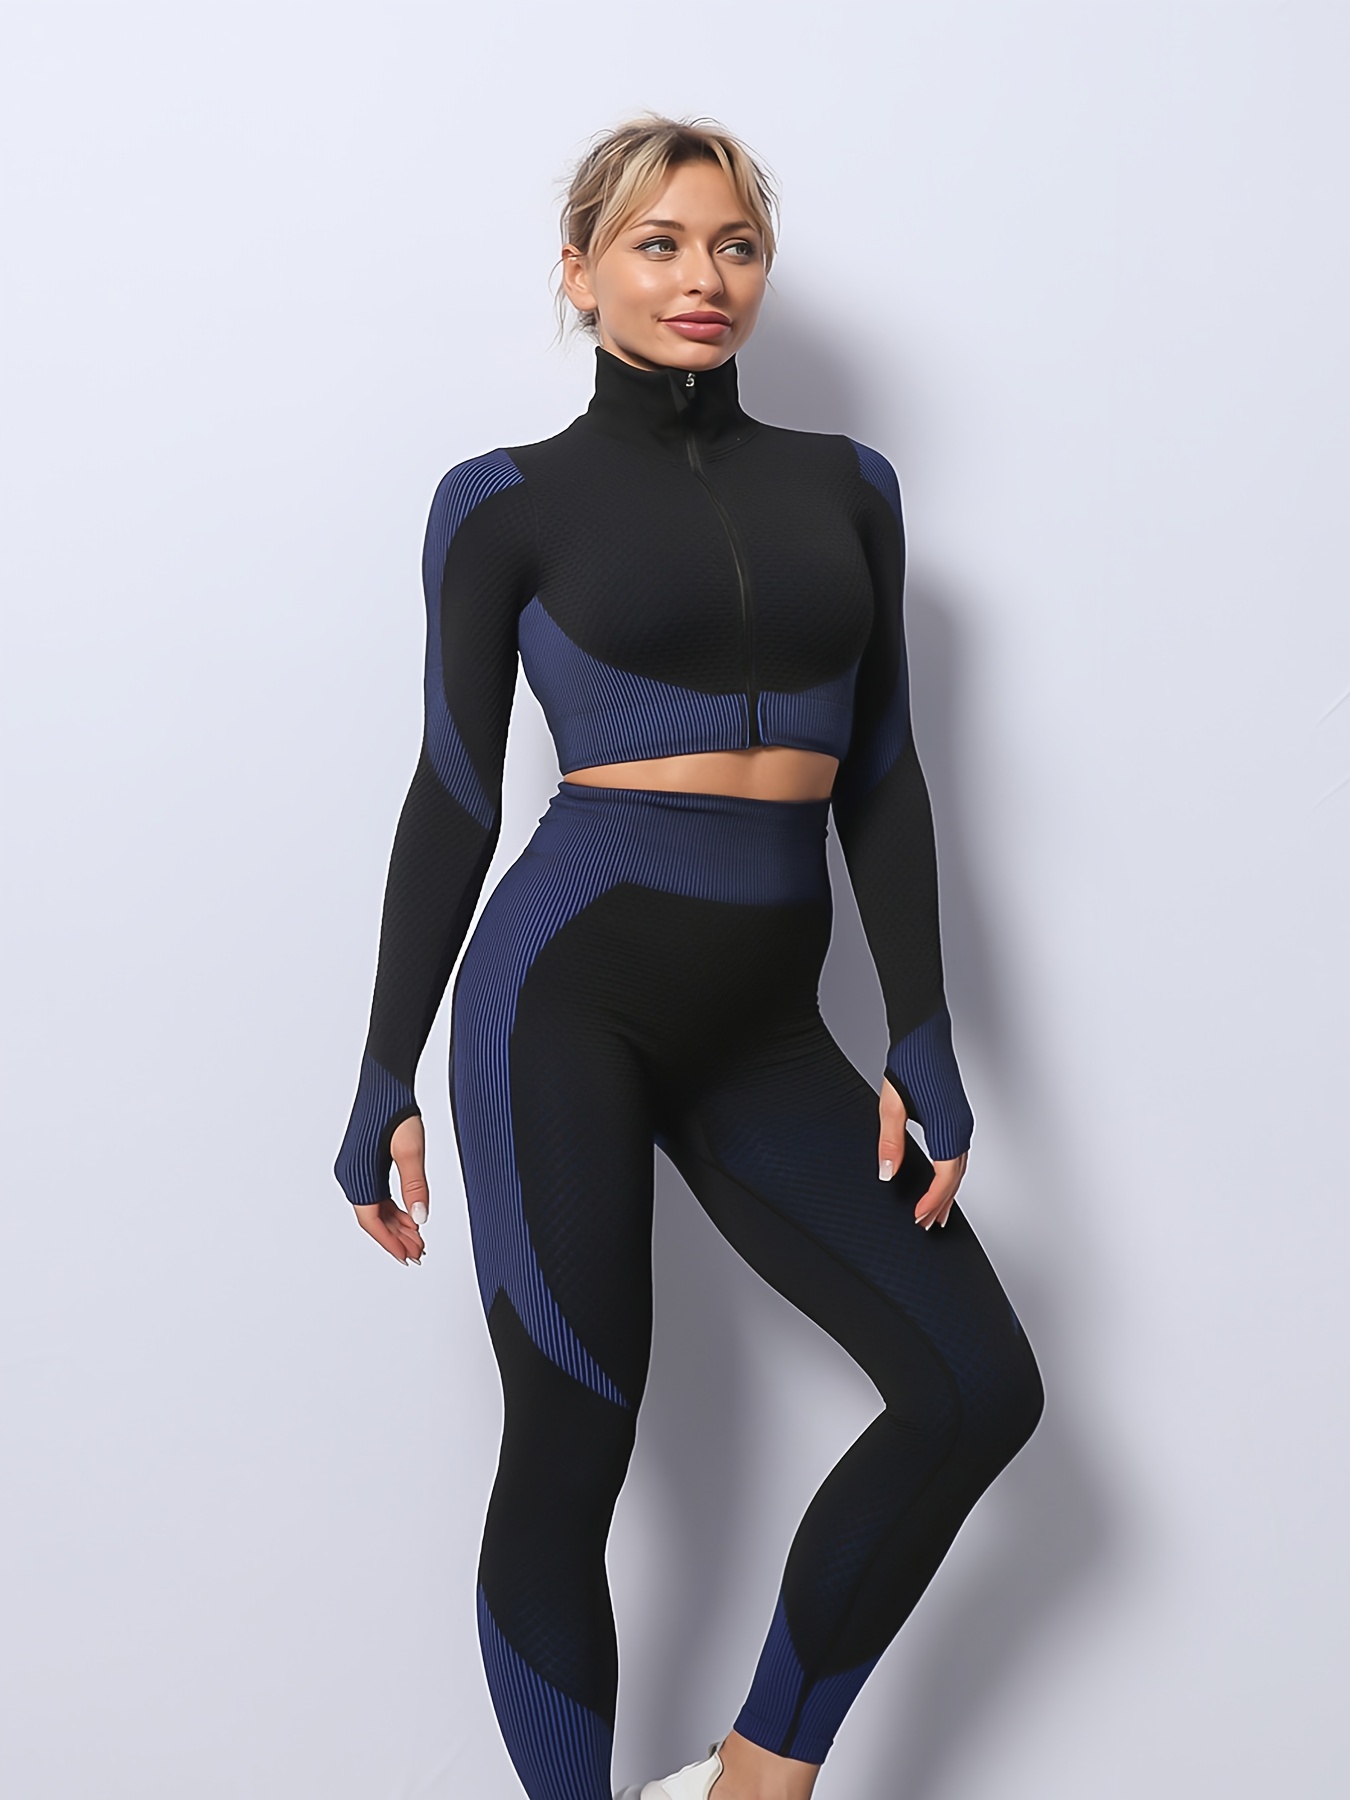 Womens Designer Athletic Tracksuit Set With Bra And Seamless Workout  Leggings Perfect For Gym, Yoga, And World Workouts From Bianvincentyg,  $30.31